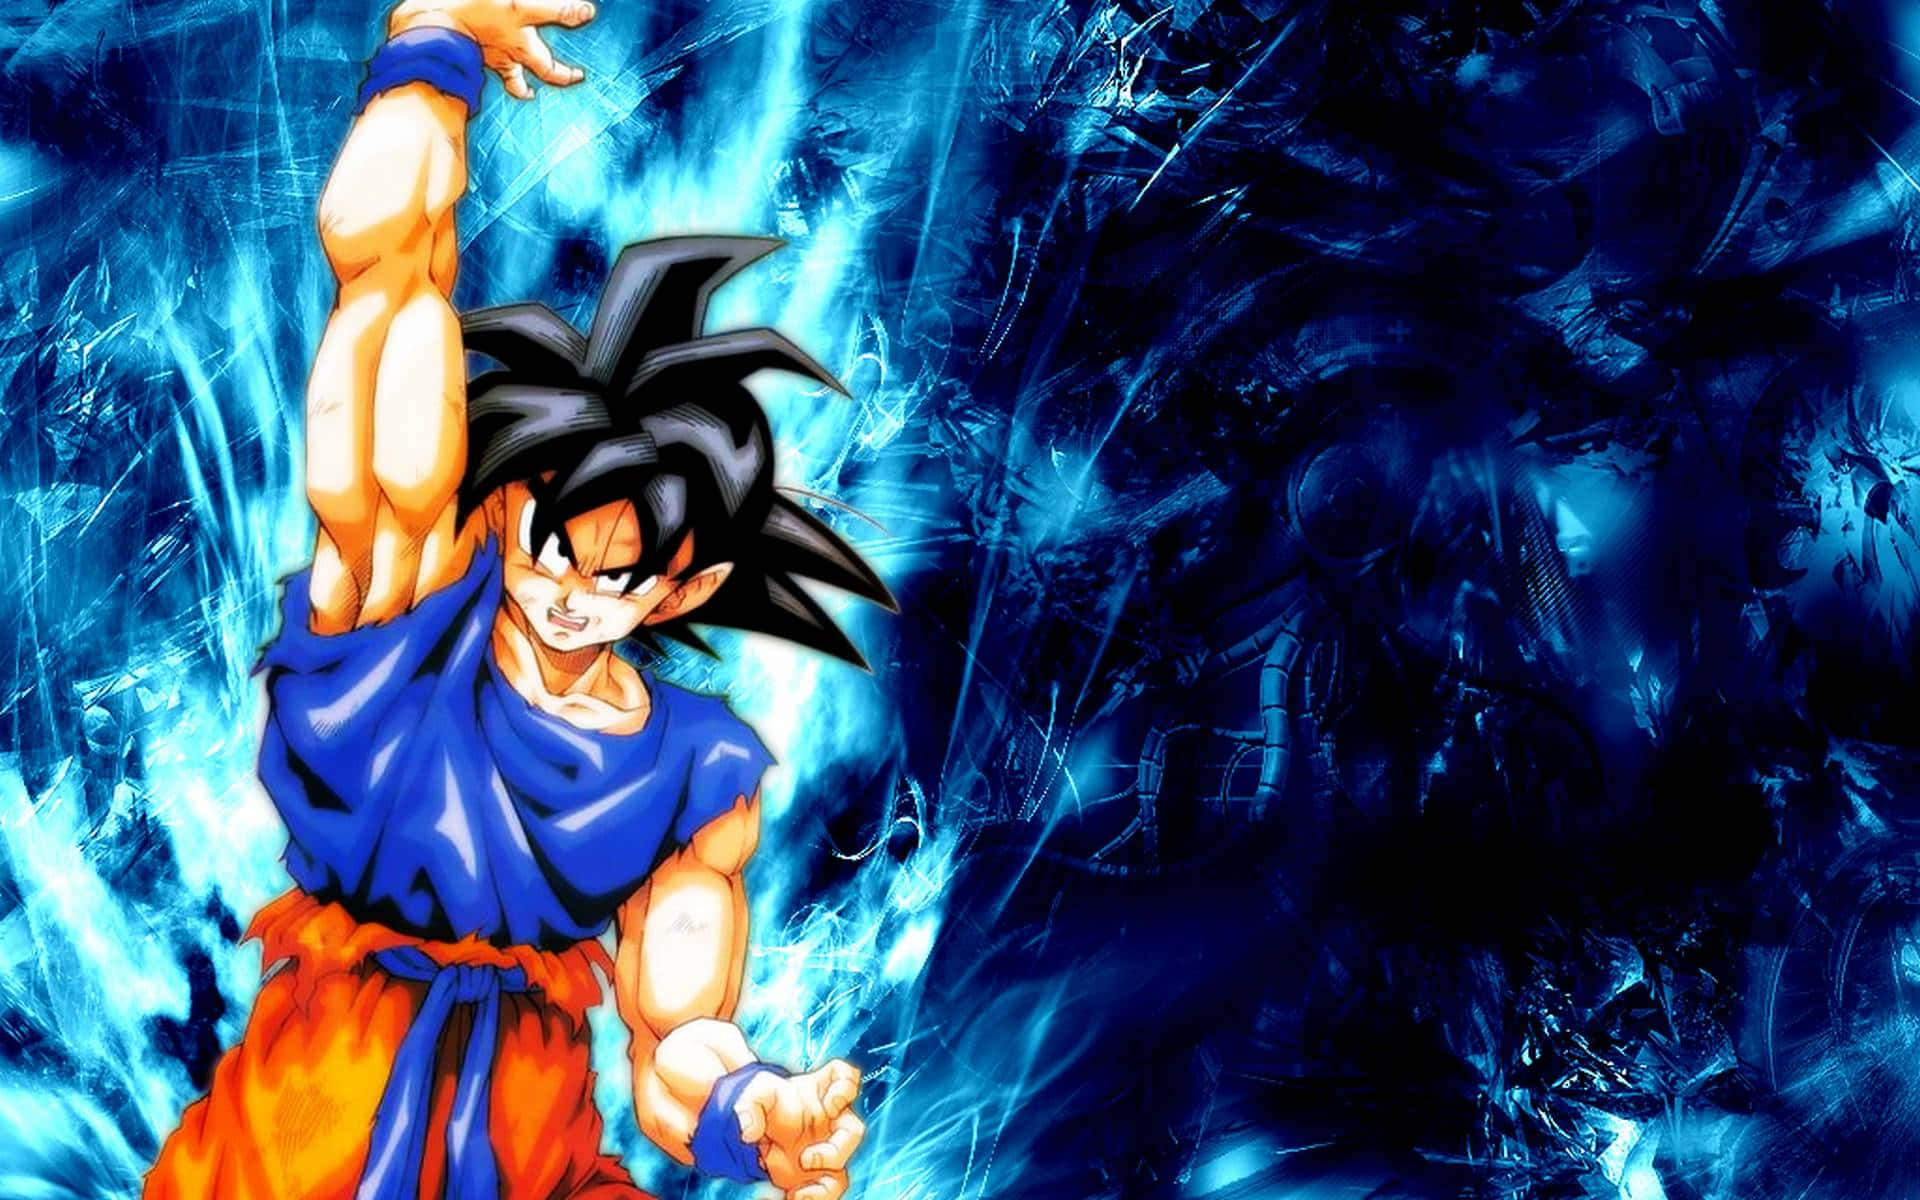 "Goku, the hero on a mission to bring peace to the universe!"